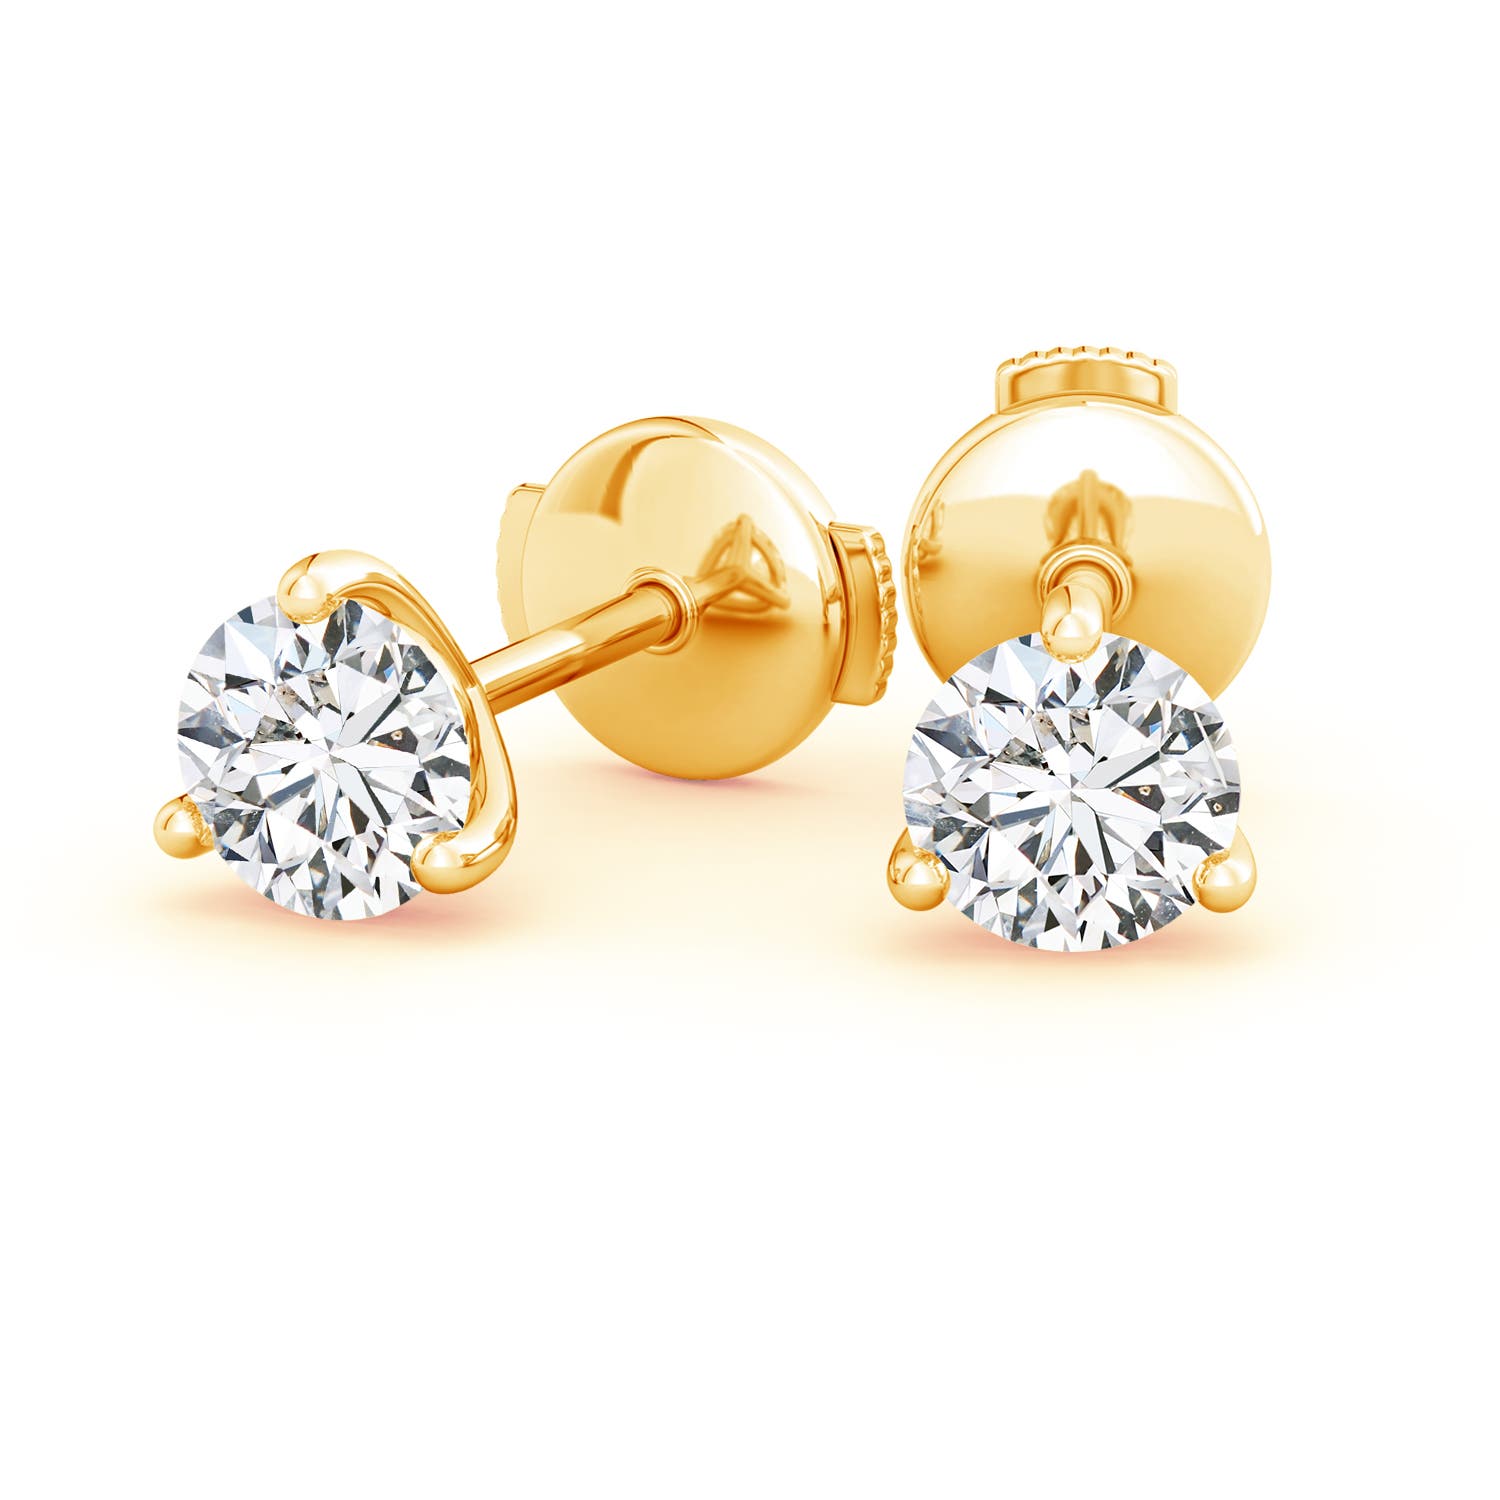 H, SI2 / 1.26 CT / 14 KT Yellow Gold